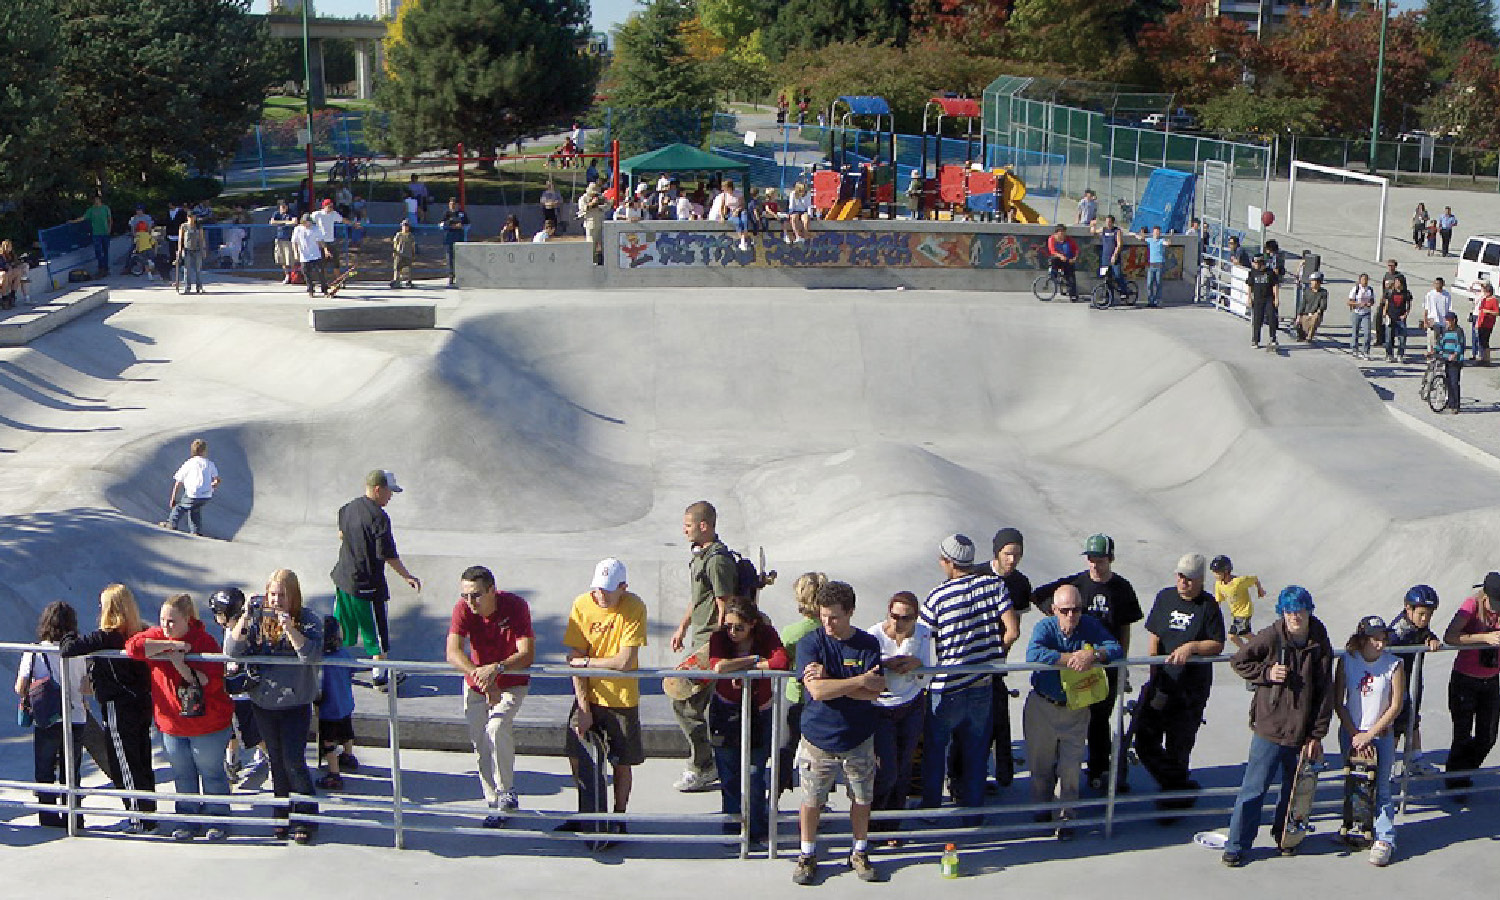 A crowd surrounds a skateboarding zone.